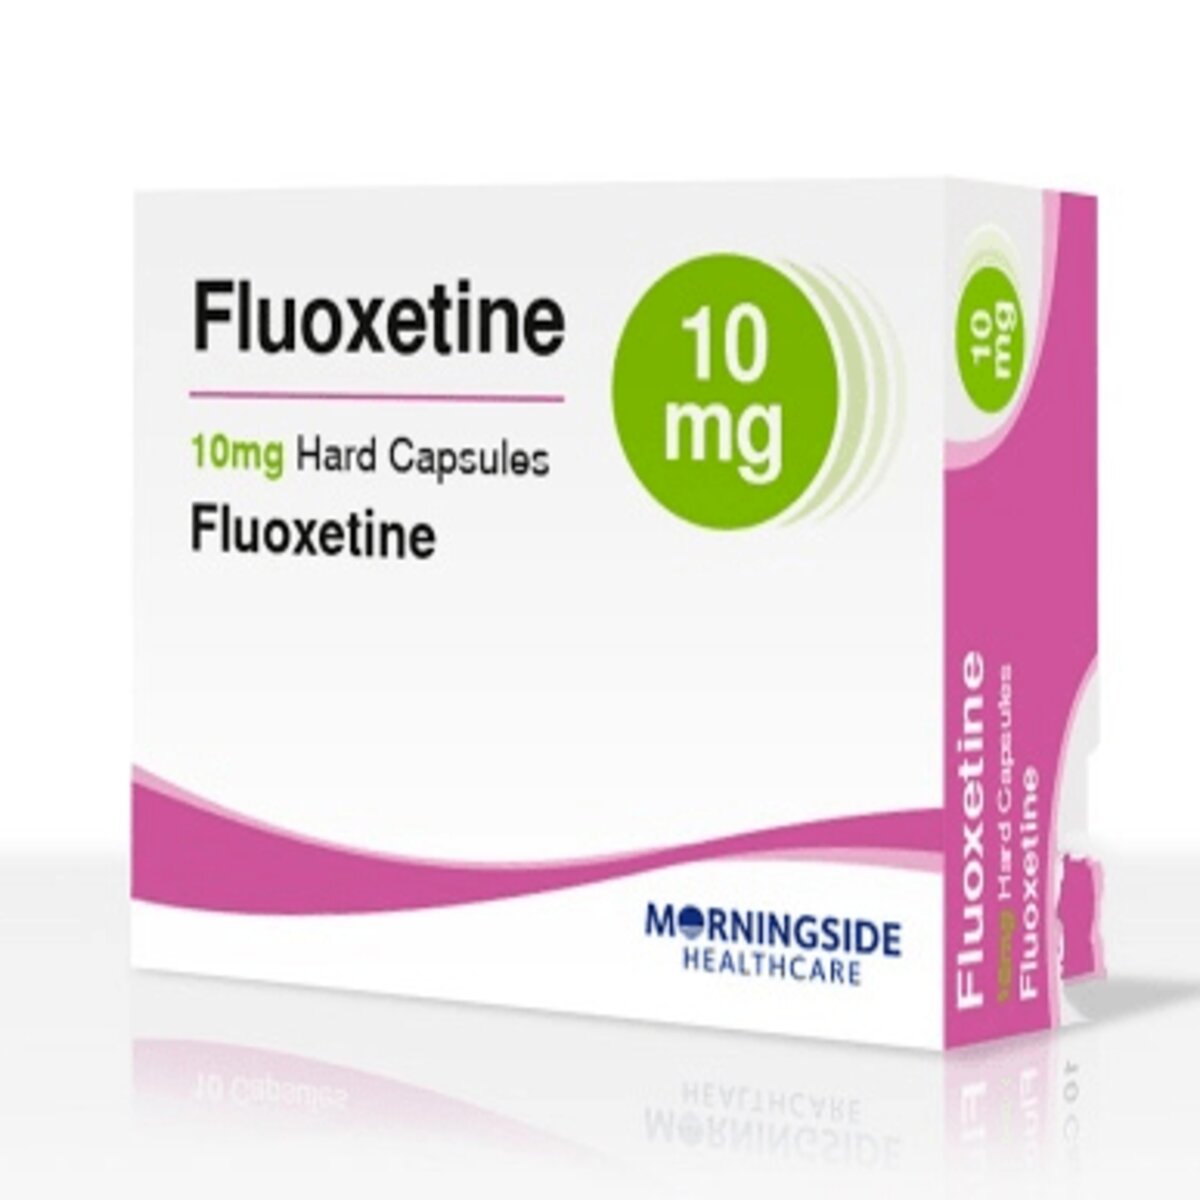 Fluoxetine 40 mg (sold per capsule) | PetMeds